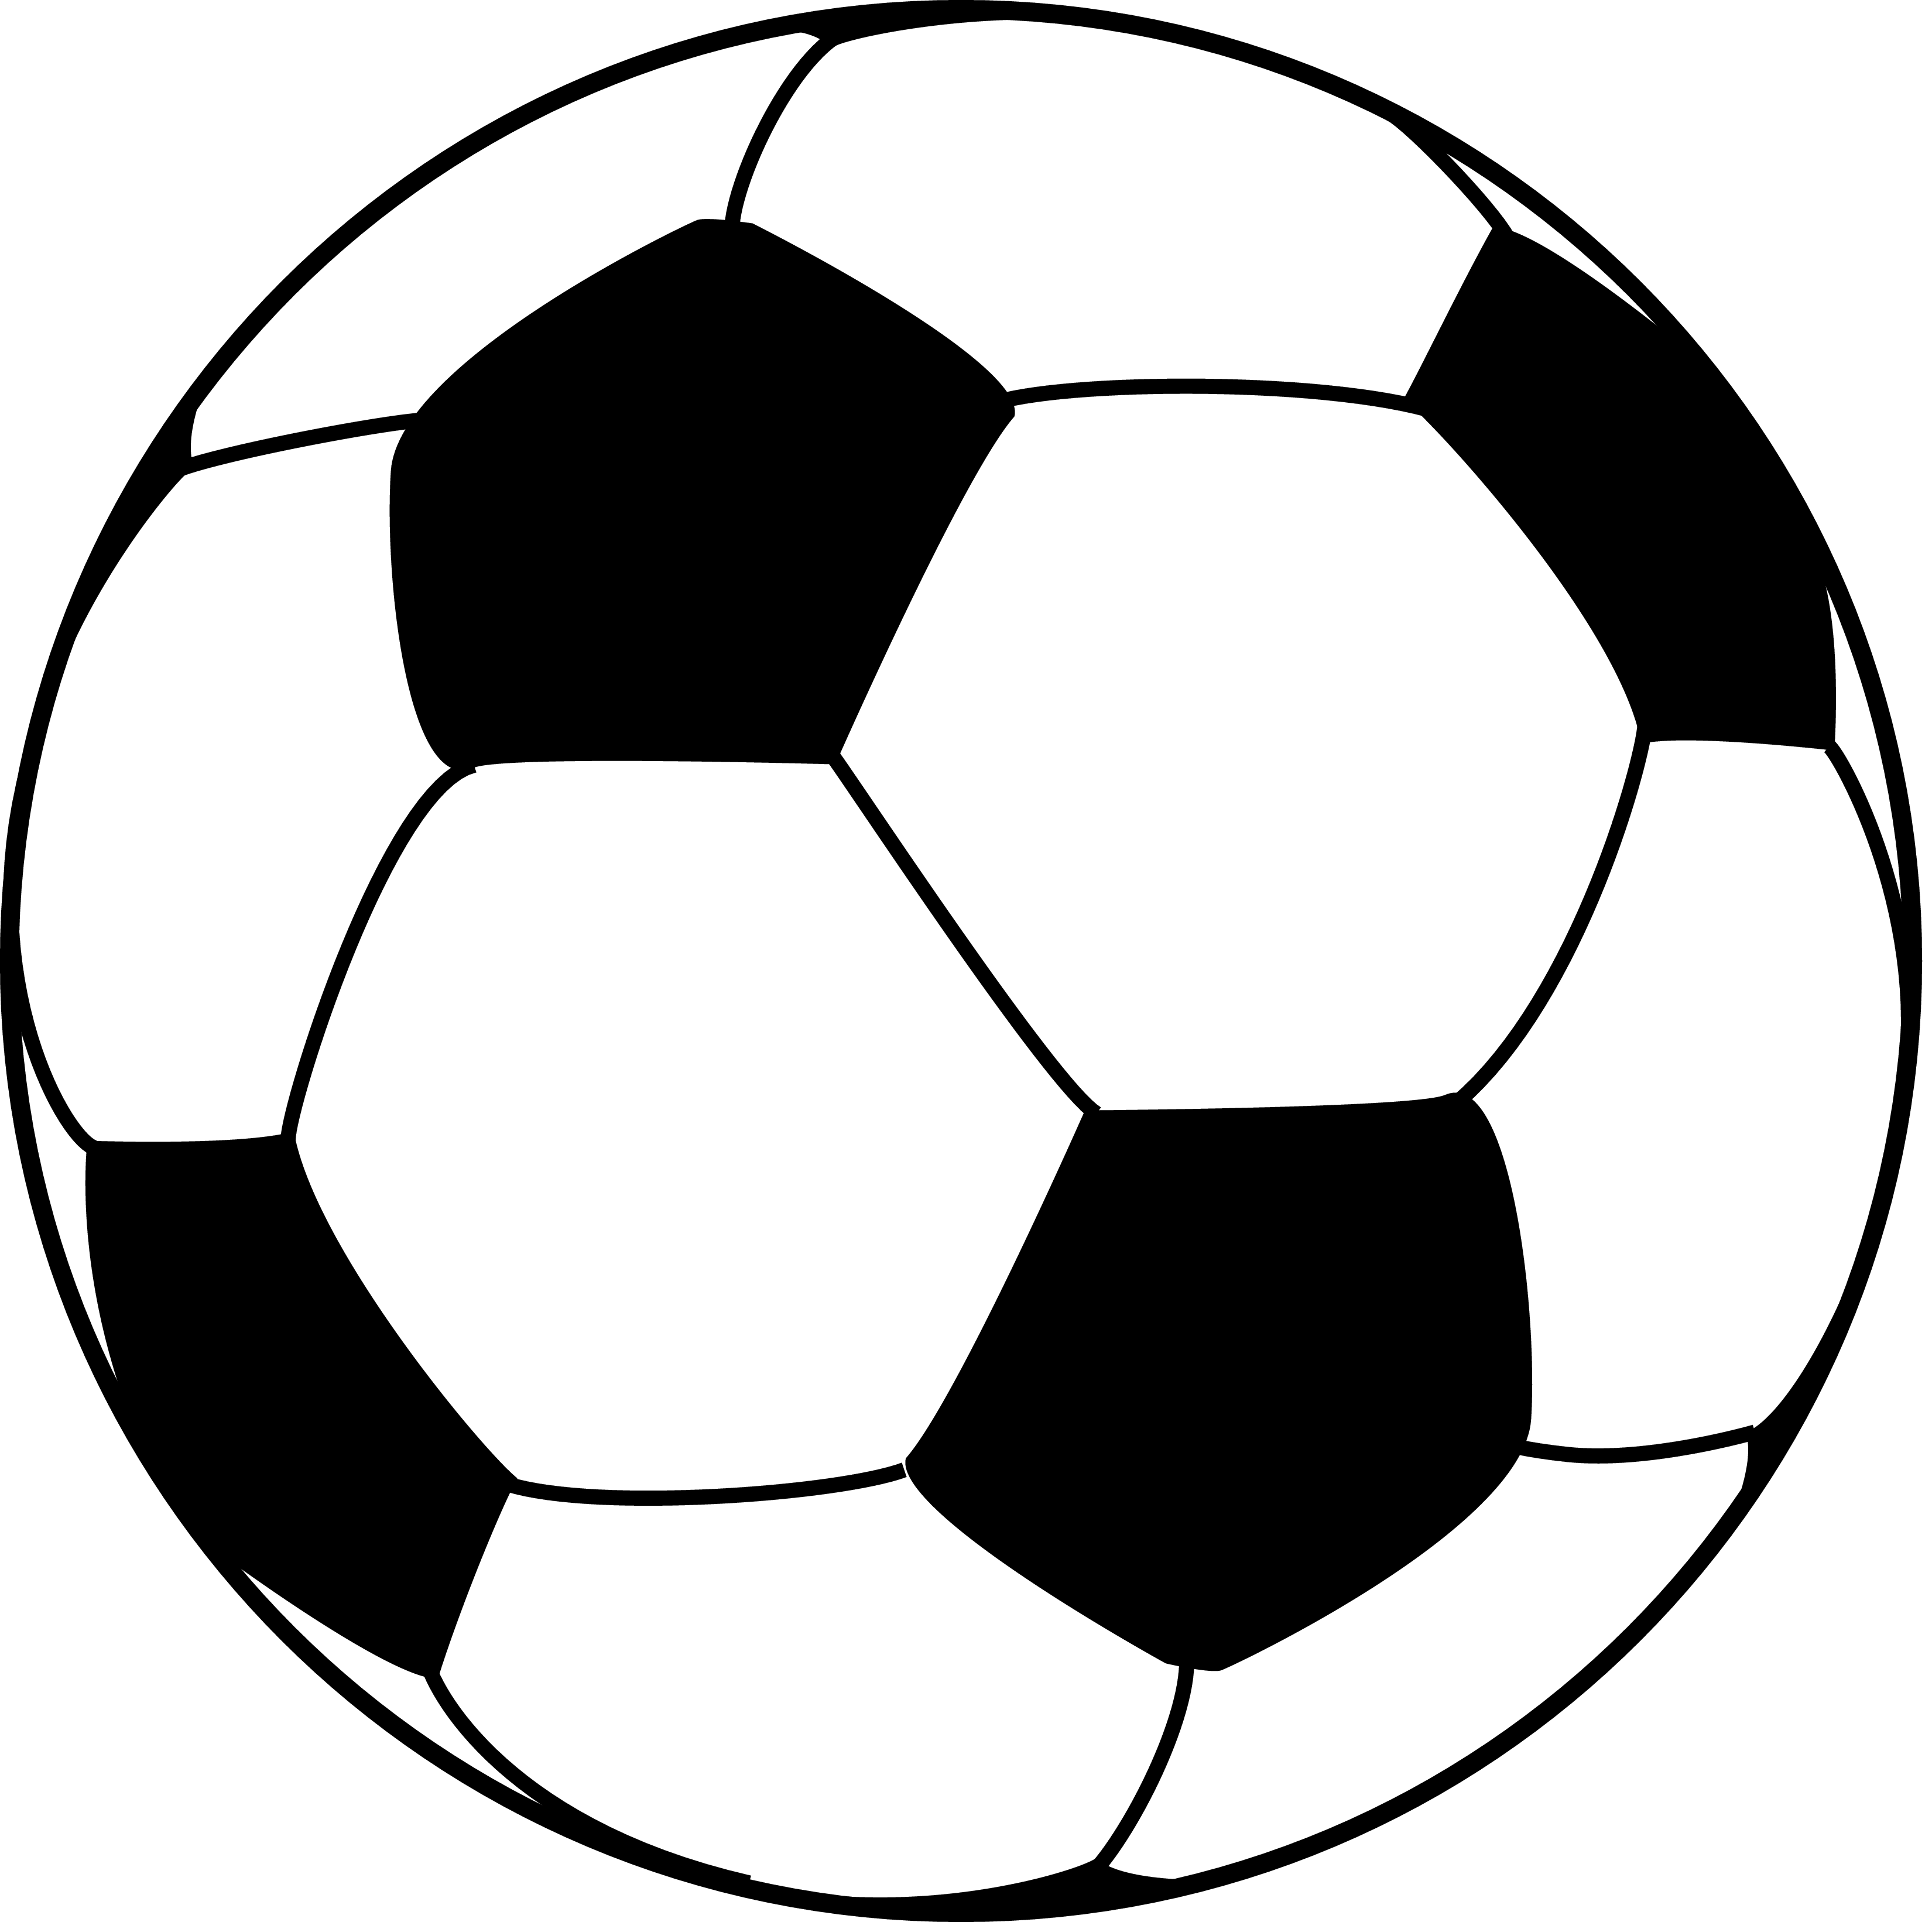 Feet clipart soccer. Ball drawing easy at